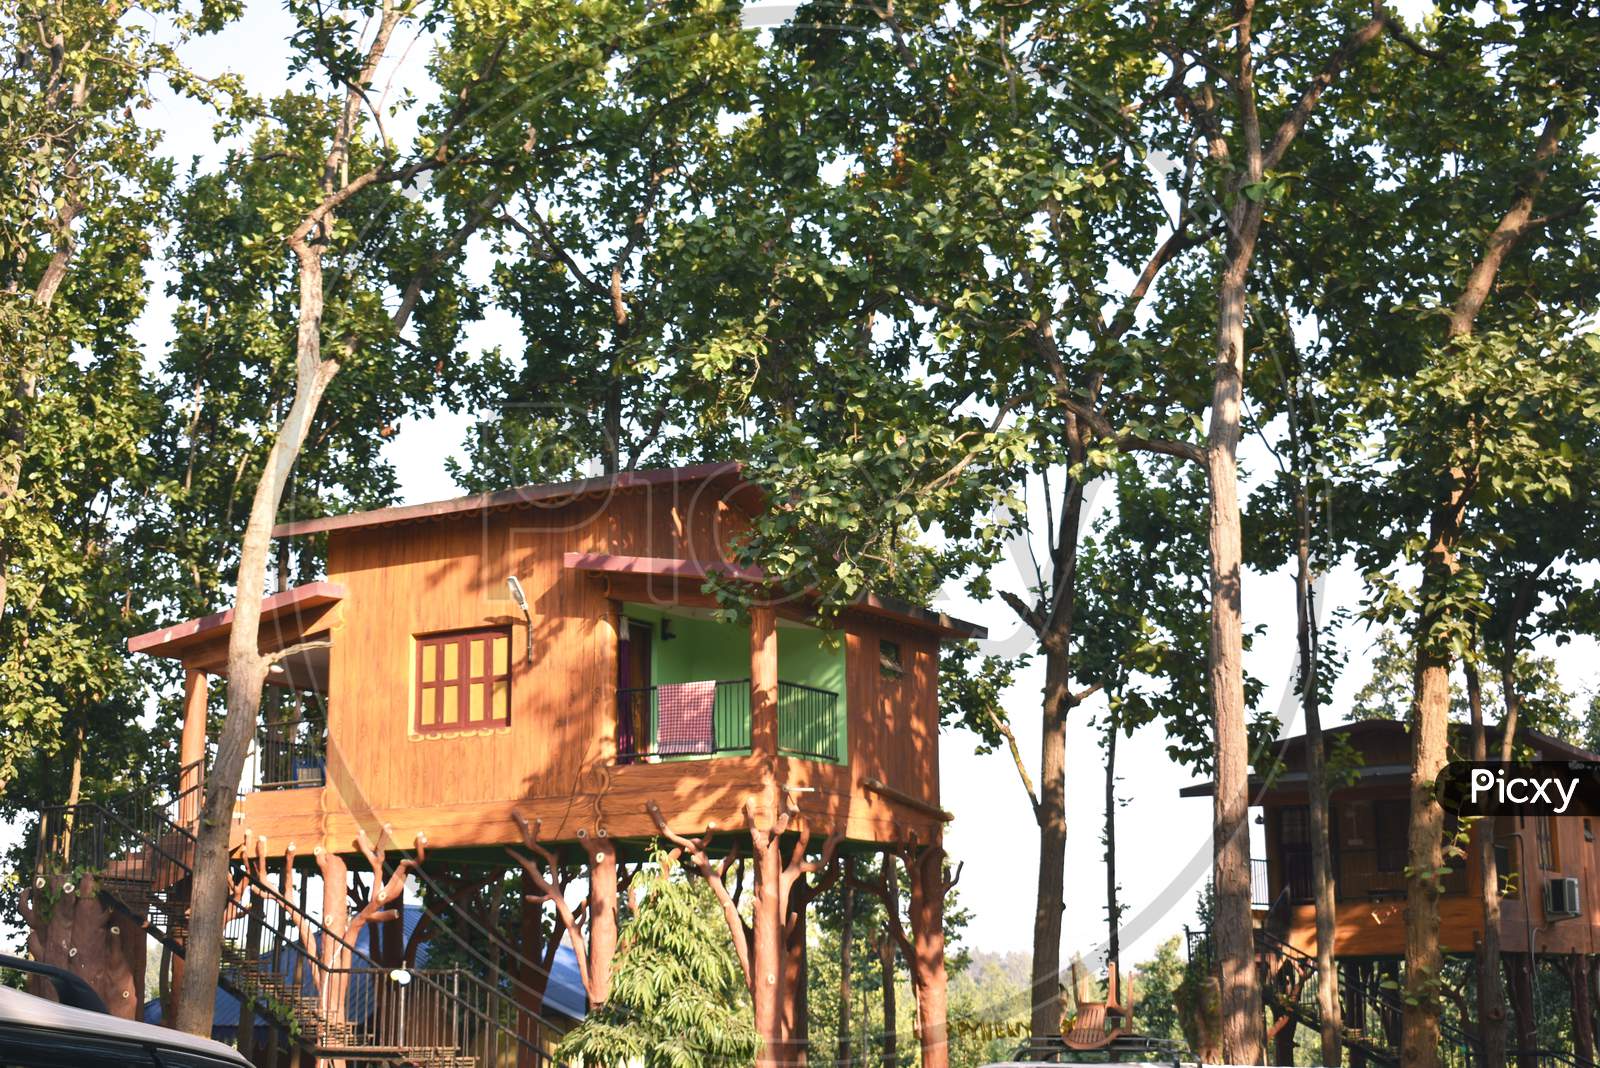 A Wooden Tree House Build In A Resort Surrounded By Green Trees